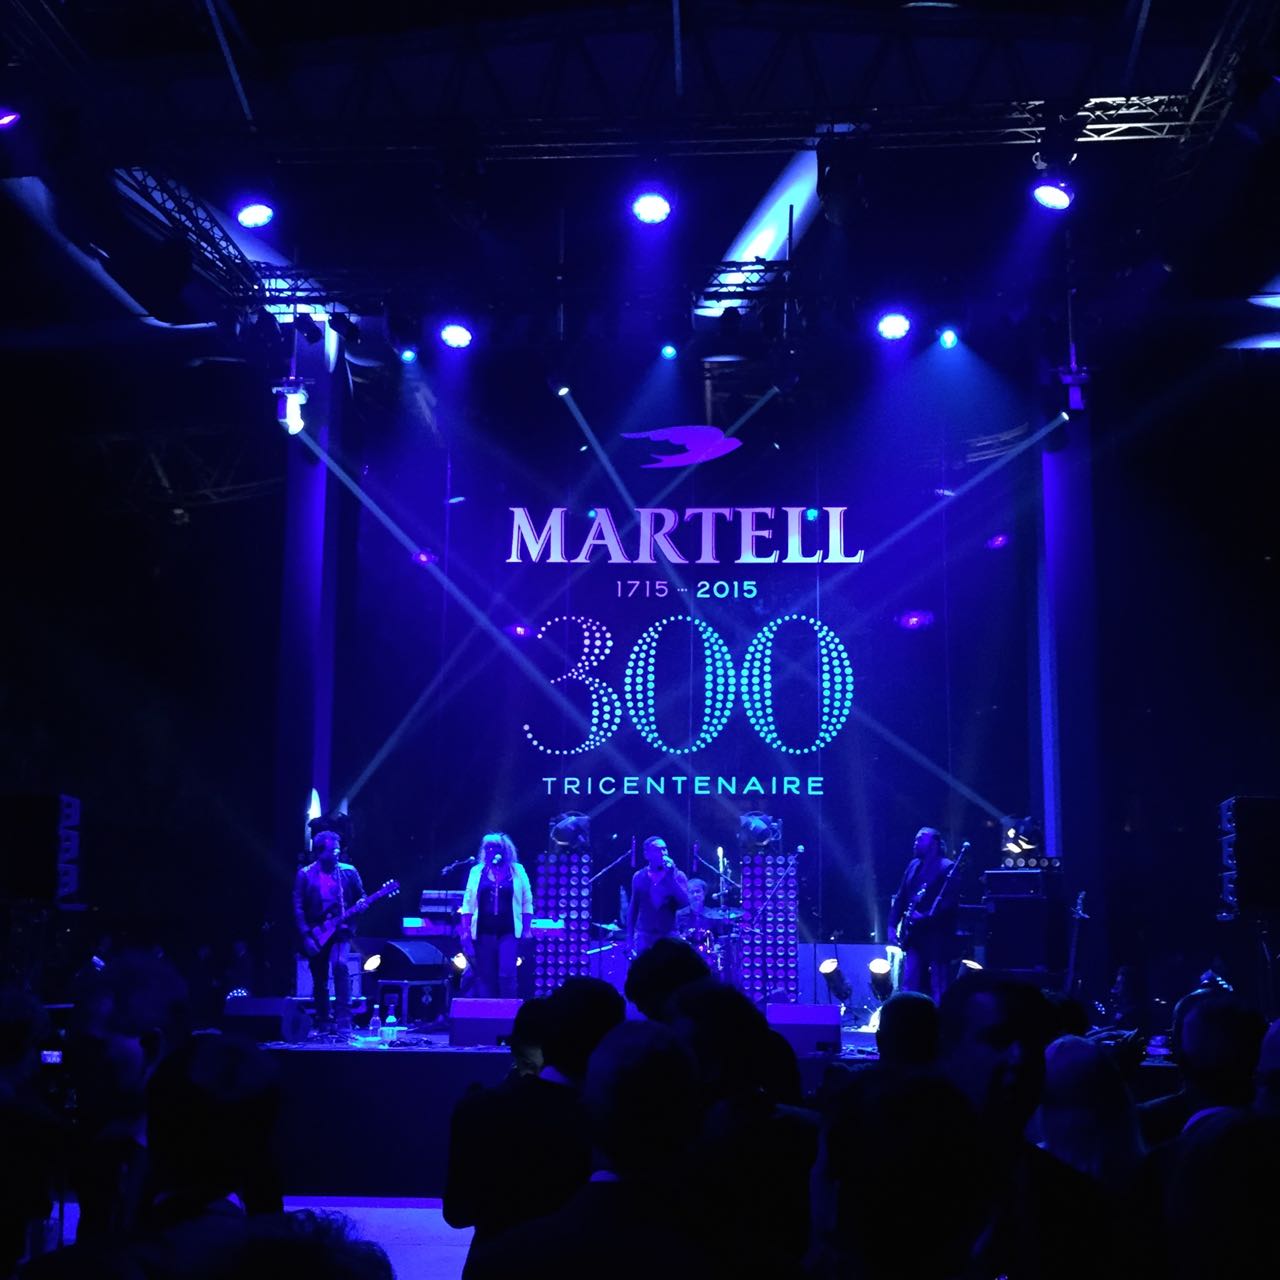 The House of Martell: 300 Years of Greatest Cognac Making